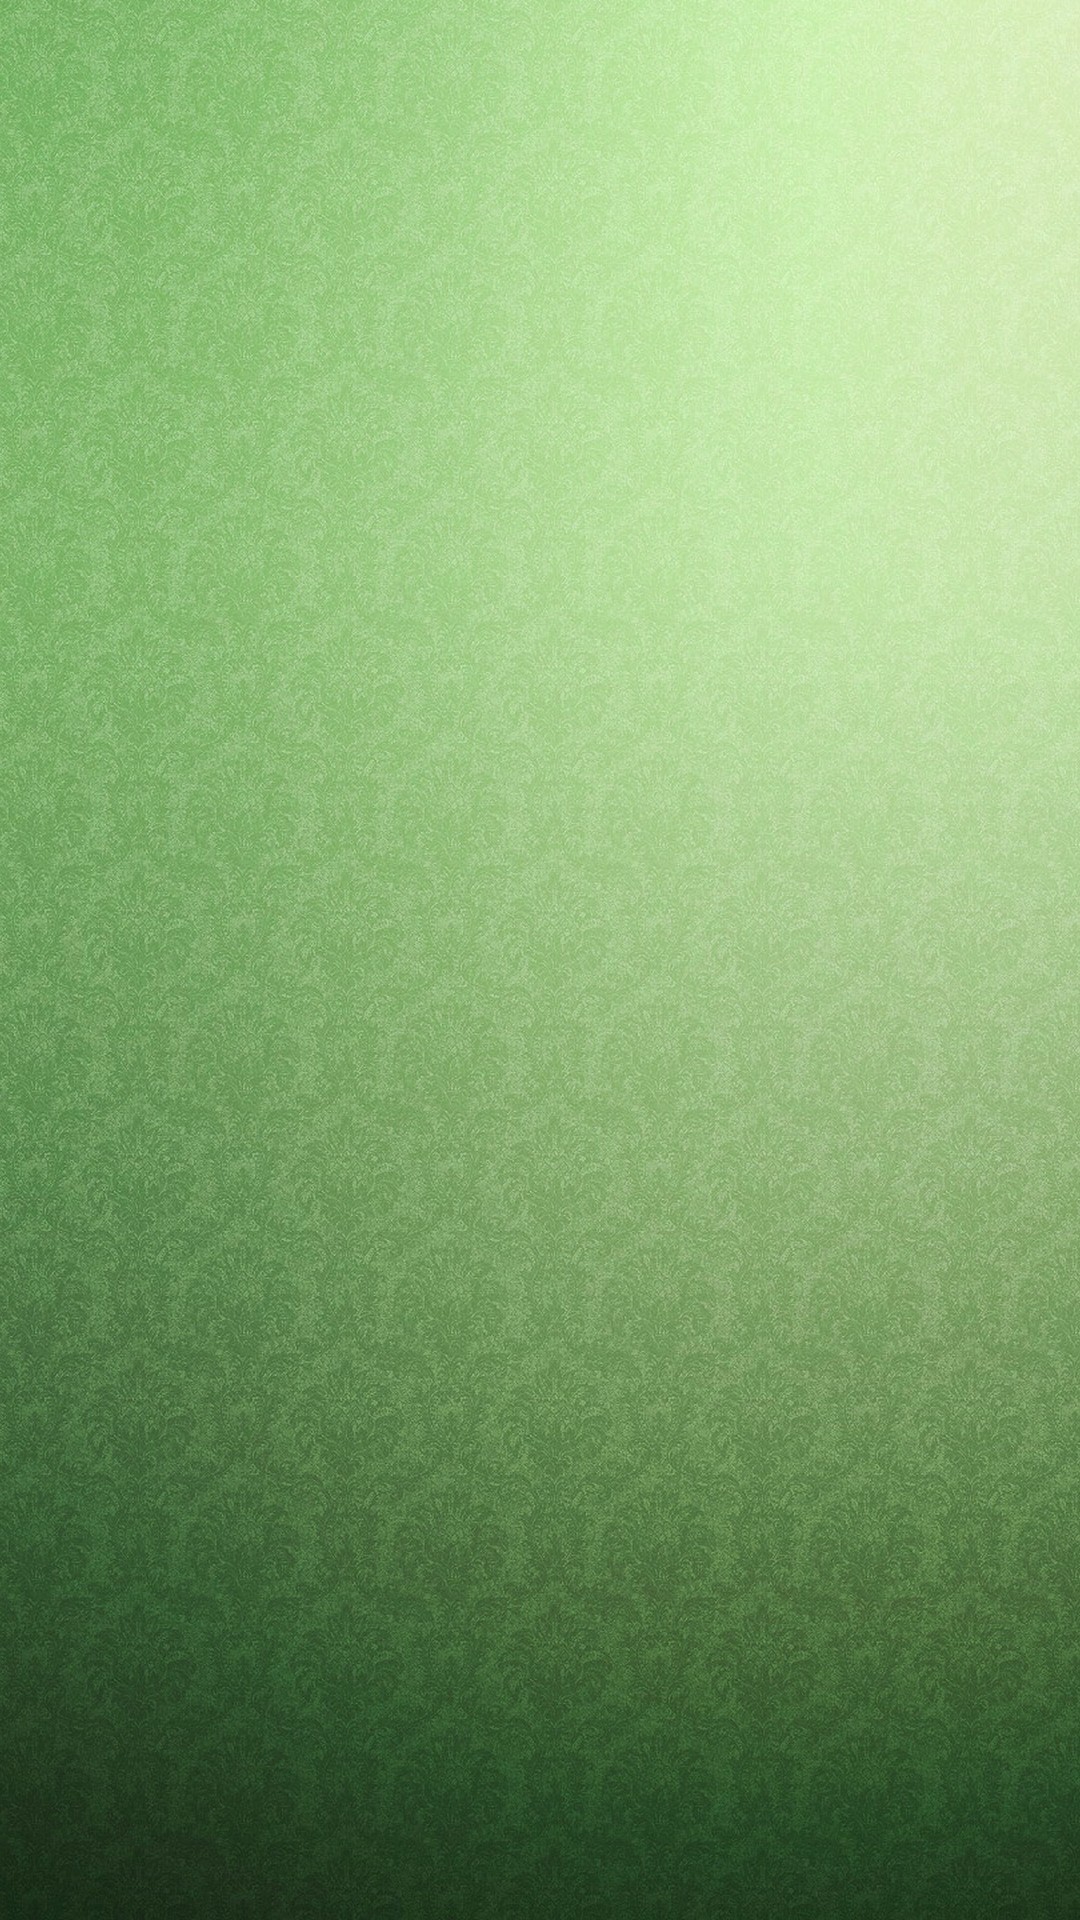 Green Colour iPhone Wallpaper with image resolution 1080x1920 pixel. You can make this wallpaper for your iPhone 5, 6, 7, 8, X backgrounds, Mobile Screensaver, or iPad Lock Screen